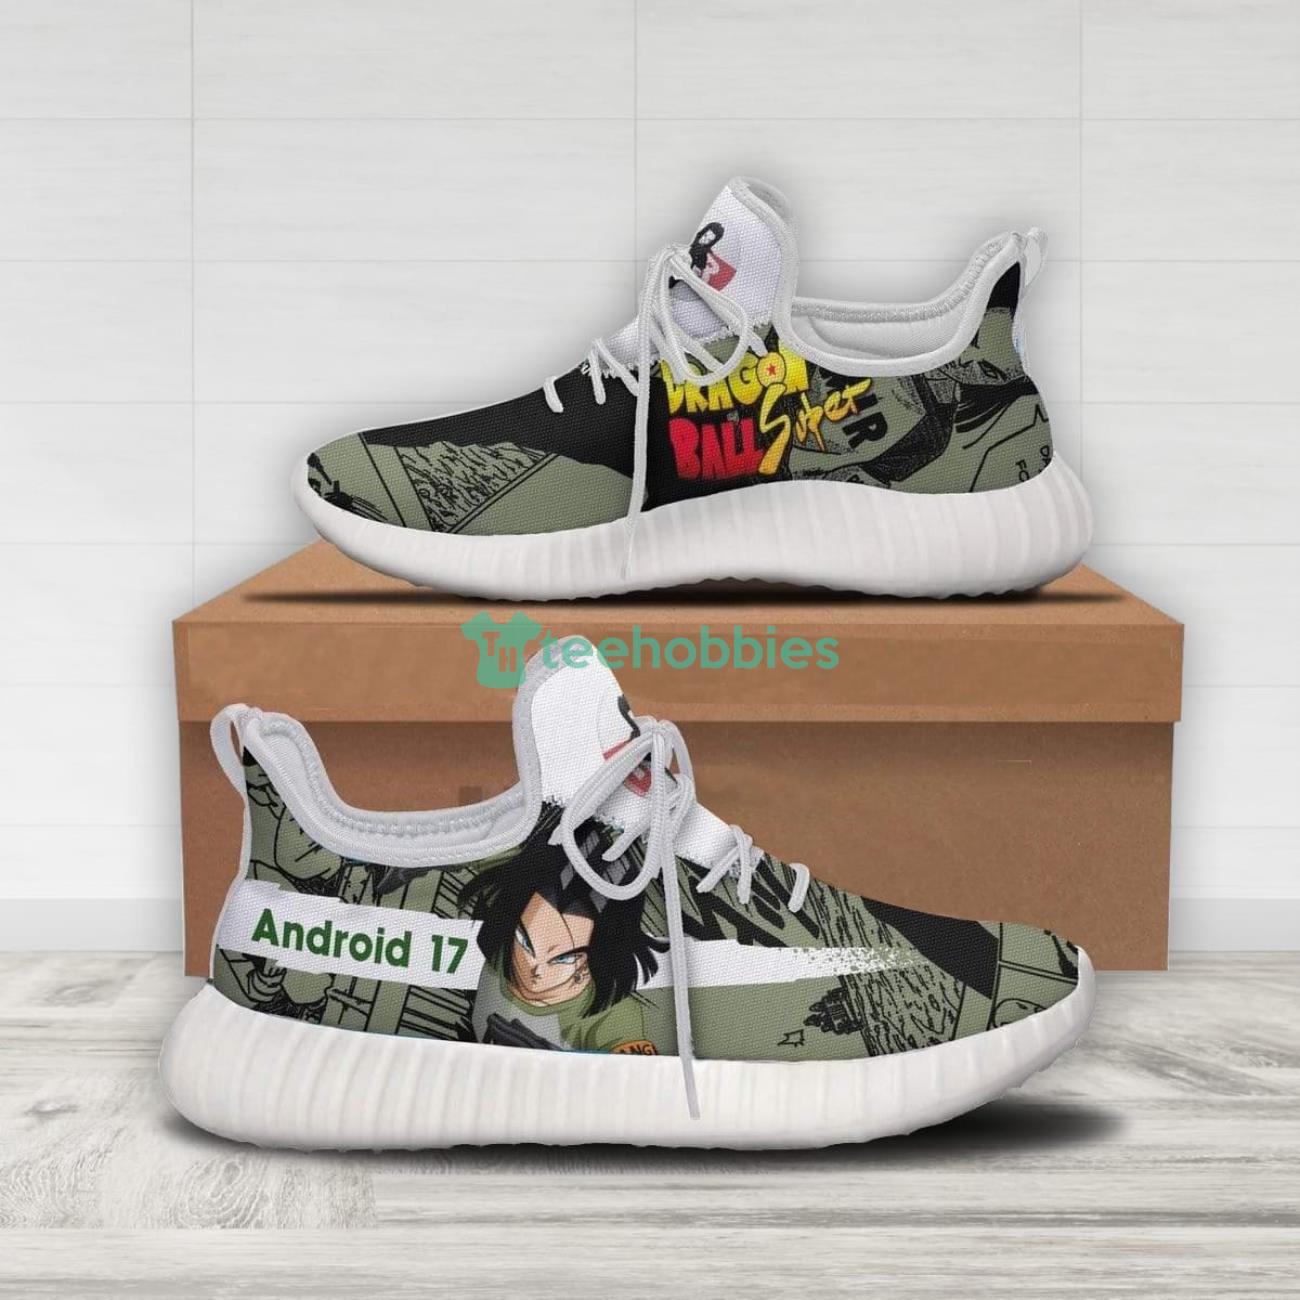 Android 17 Custom Dragon Ball Anime Fans Reze Shoes Product Photo 1 Product photo 1